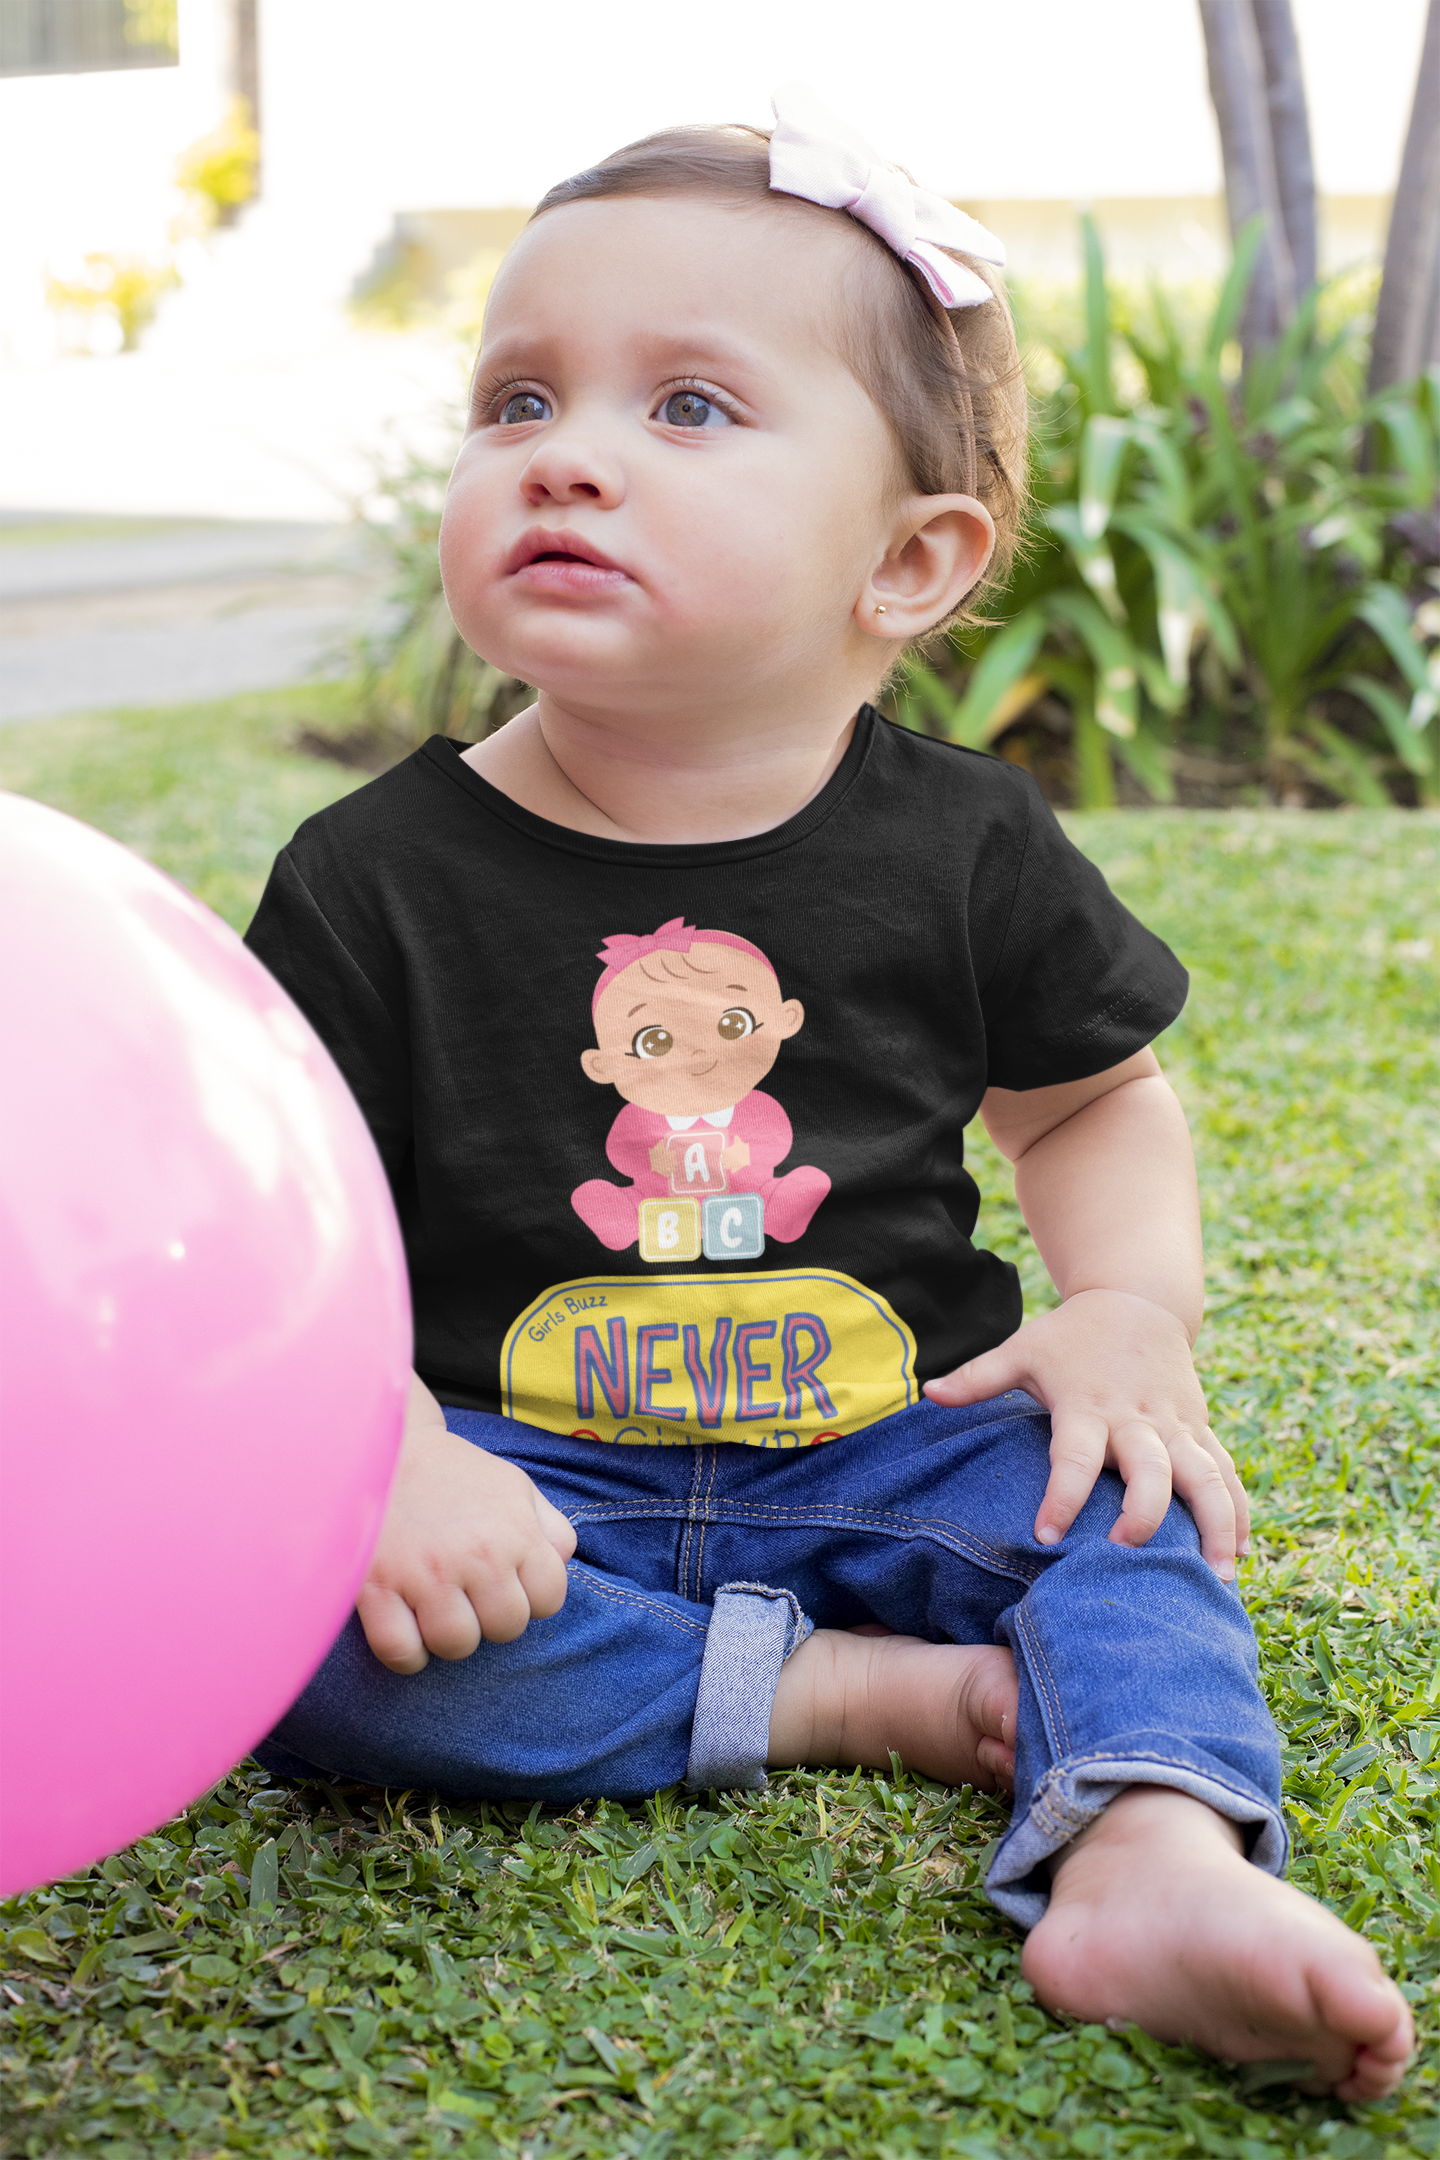 Never Give Up Toddler T-shirt